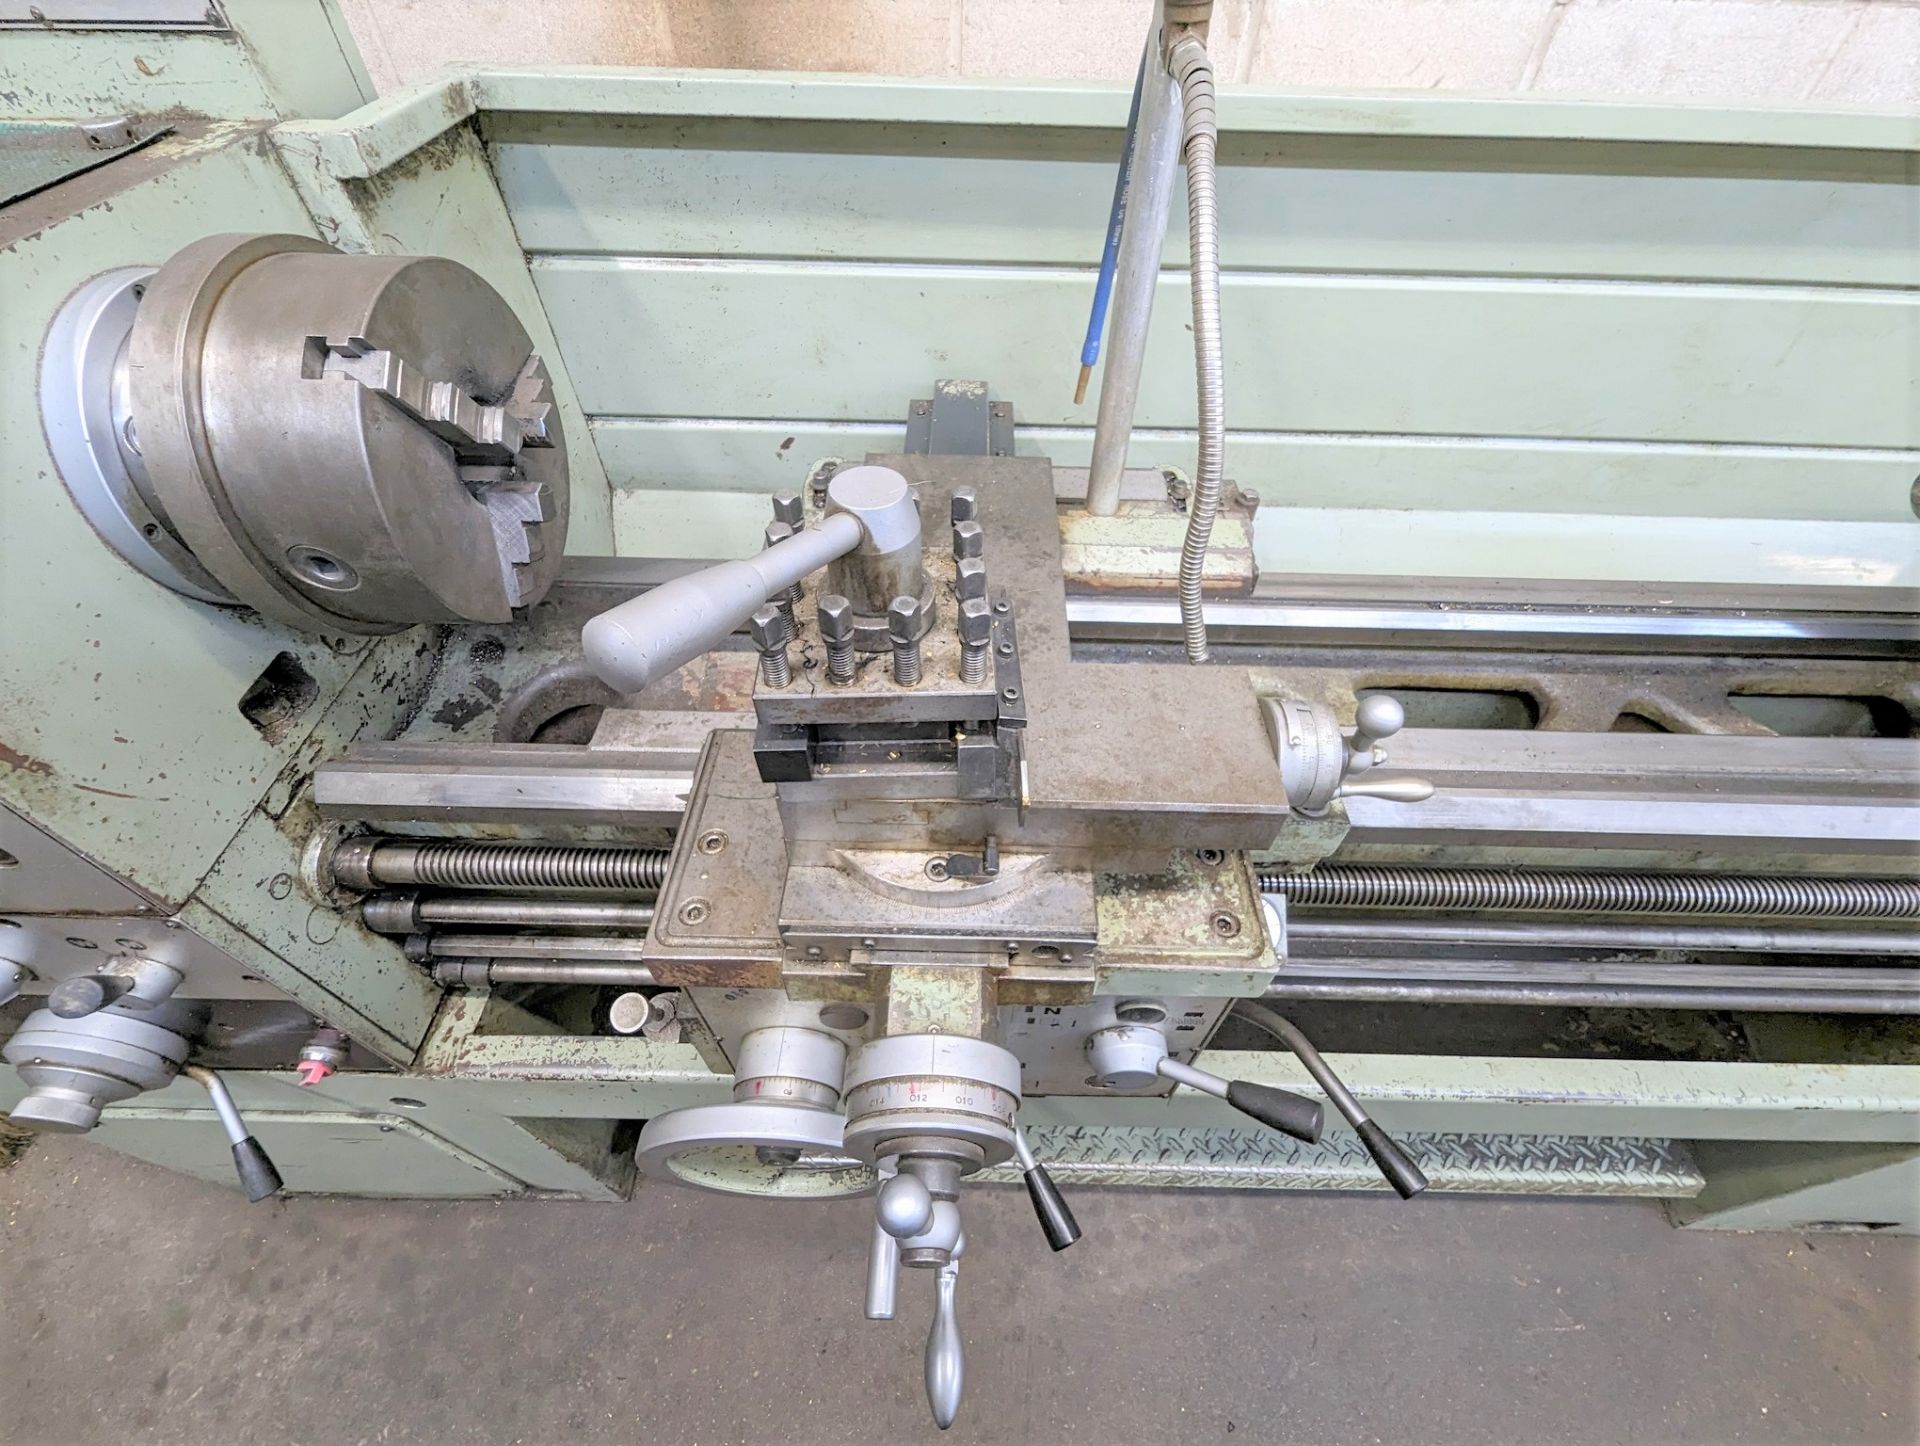 TAKANG TK 380XL ENGINE LATHE, 9” 3-JAW CHUCK, 18” SWING, 72” BED, 2.25” BORE, TAILSTOCK, TOOL - Image 5 of 18